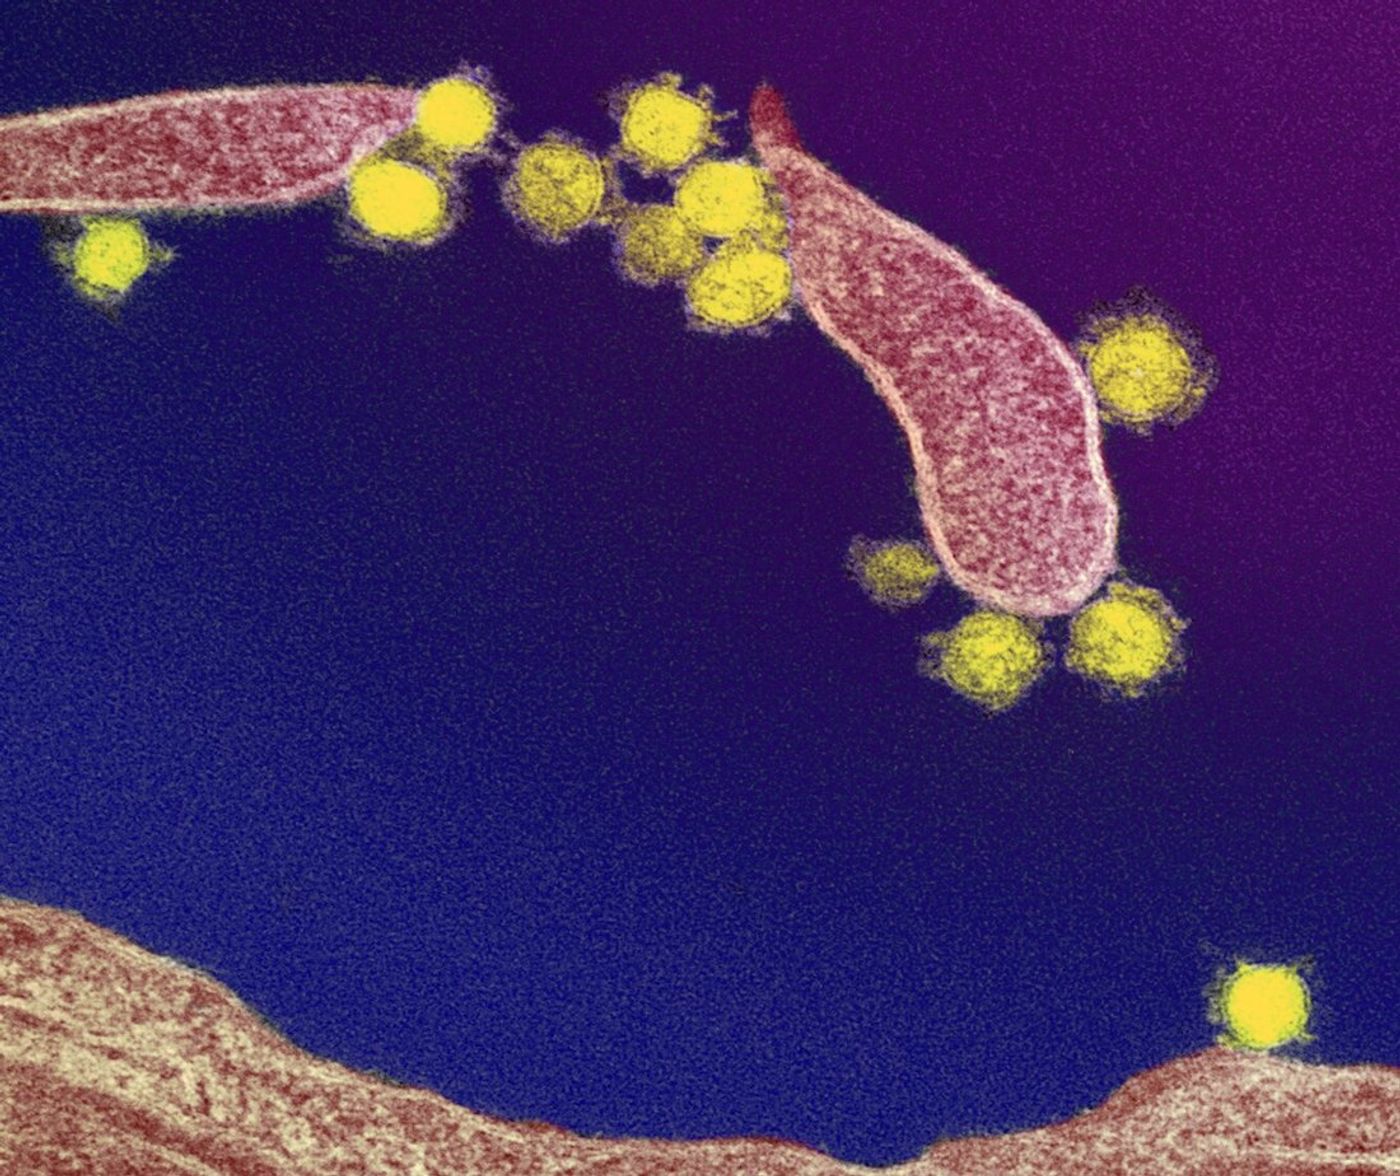 This transmission electron microscope image shows SARS-CoV-2, the virus that causes COVID-19. Virus particles are shown emerging from the surface of a cell cultured in the lab. The spikes on the outer edge of the virus particles give coronaviruses their name, crown-like. Image captured and colorized at Rocky Mountain Laboratories in Hamilton, Montana. / Credit: NIAID